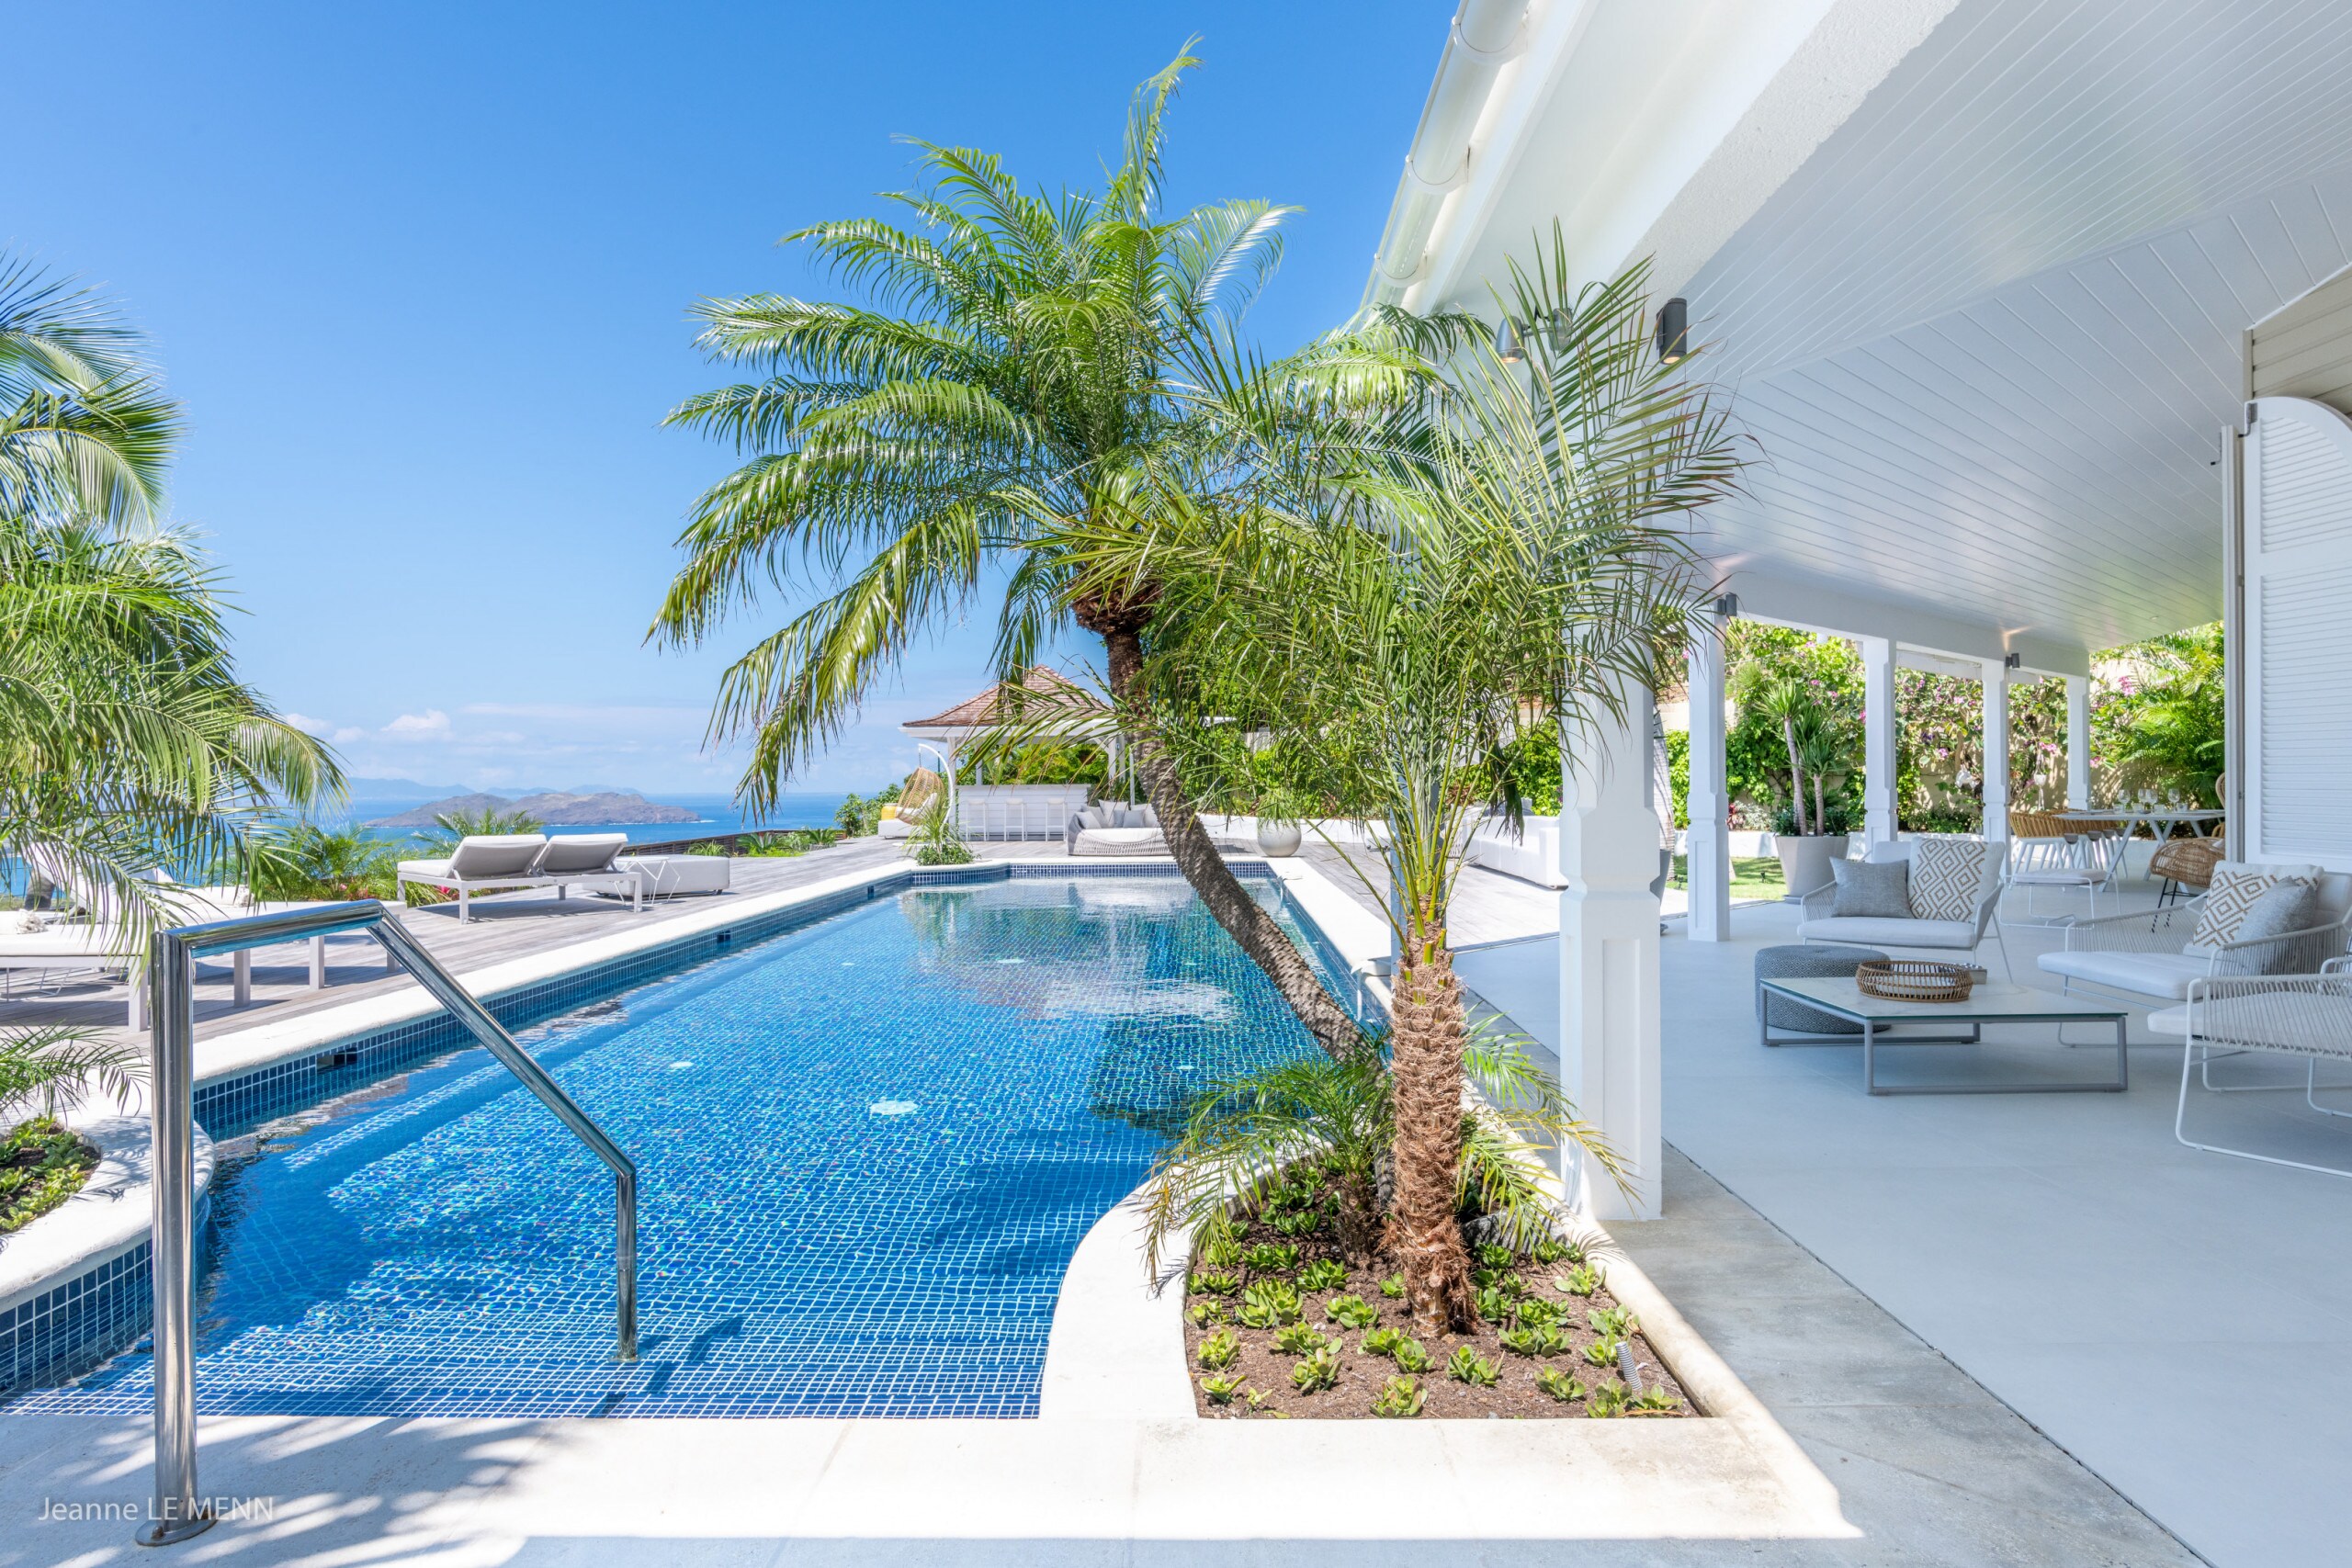 Nice heated pool of 18 m long, expansive terrace with loungers and deck chairs.&nbsp;